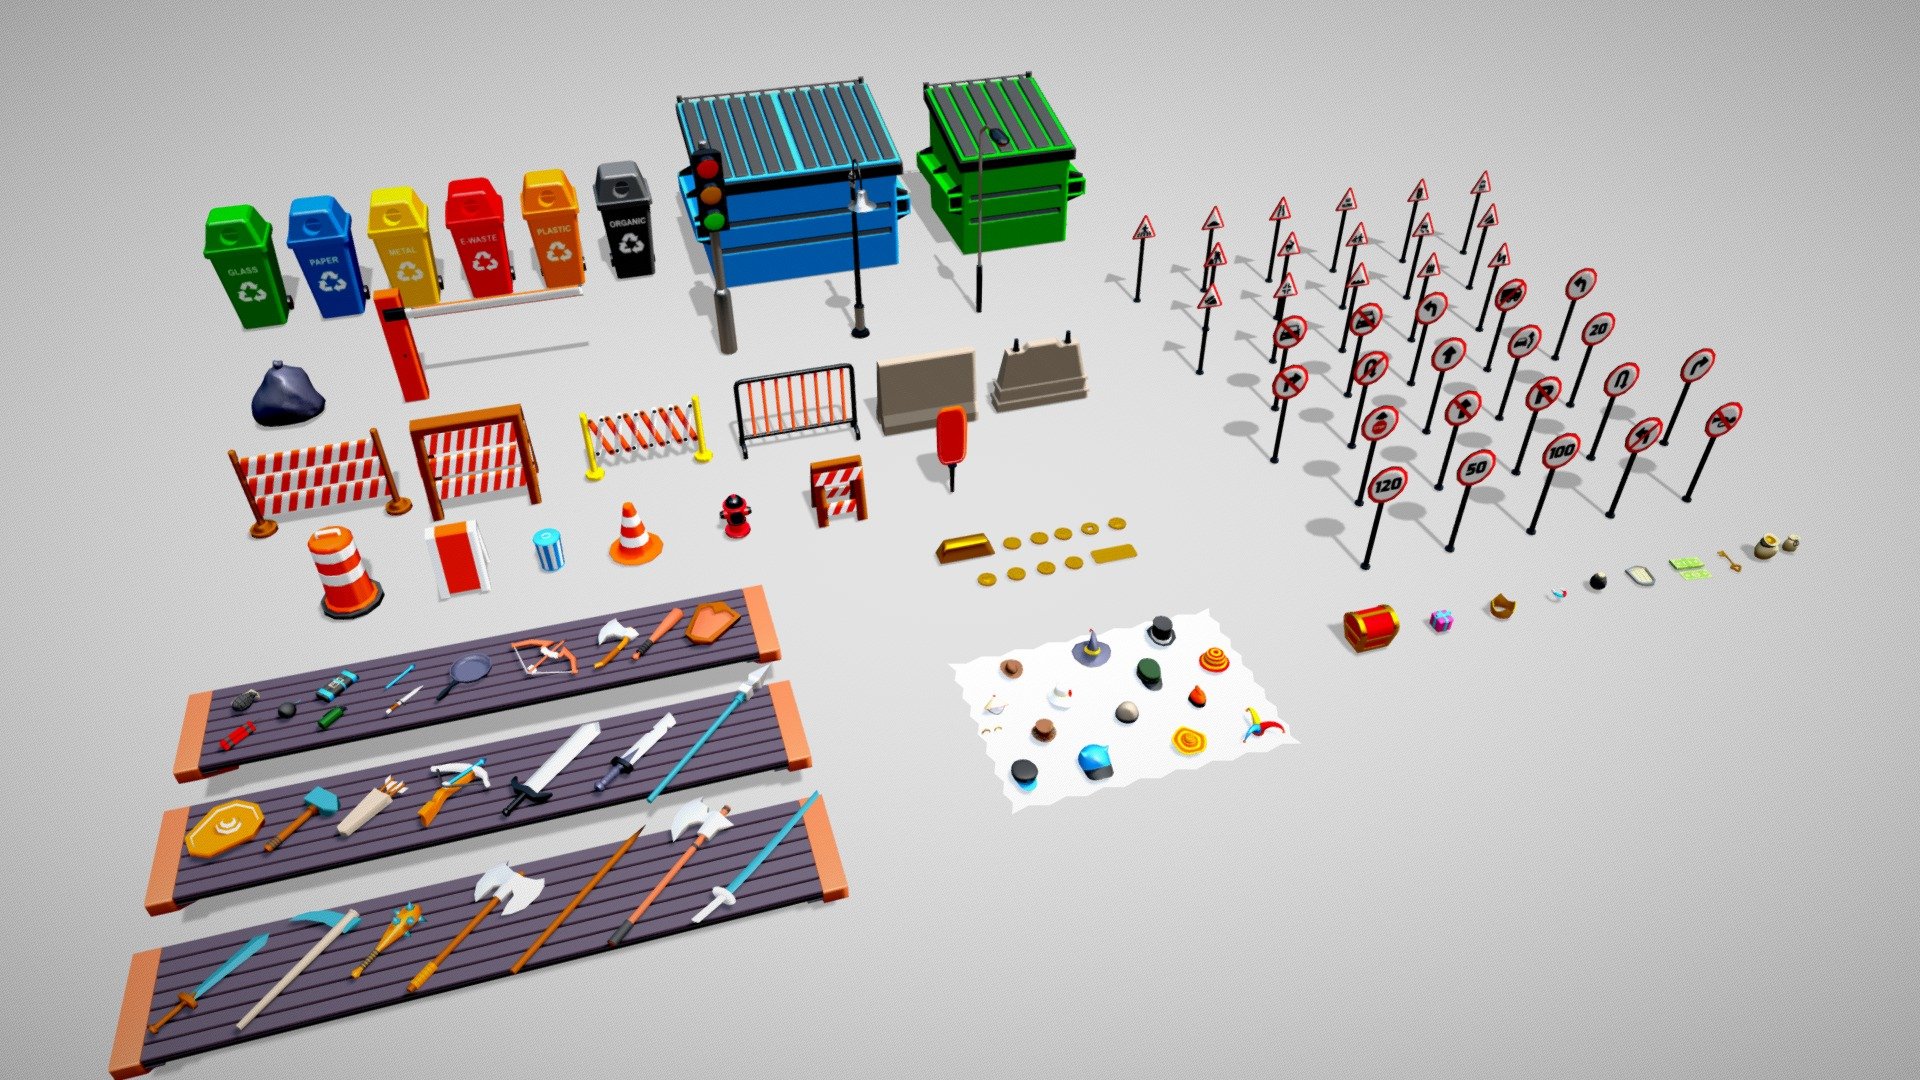 This pack includes a ready-to-use &amp; very useful game assets pack. There are the following types of assets: 1) Wooden Tables. 2) Dustbins. 3) Mat. 4) Traffic Signs. 5) Fire Hydrant. 6) Road Barriers. 7) Dividers for Roads. 8) Various Hat Pack 9) Ancient weapons like Swords, Spears, Axe, Javelins, Bows, Arrows, Hammers, Mace, etc.

All the asset objects are originally modeled in a blender. Enjoy this low-poly game asset pack to make RPG game or cartoon-styled environment rendering or any other purpose of your choice. Don’t forget to leave a comment if you like this pack. Thank you - Game Assets Pack - Lowpoly - Buy Royalty Free 3D model by Logicgo Infotech (@logicgo_infotech) 3d model